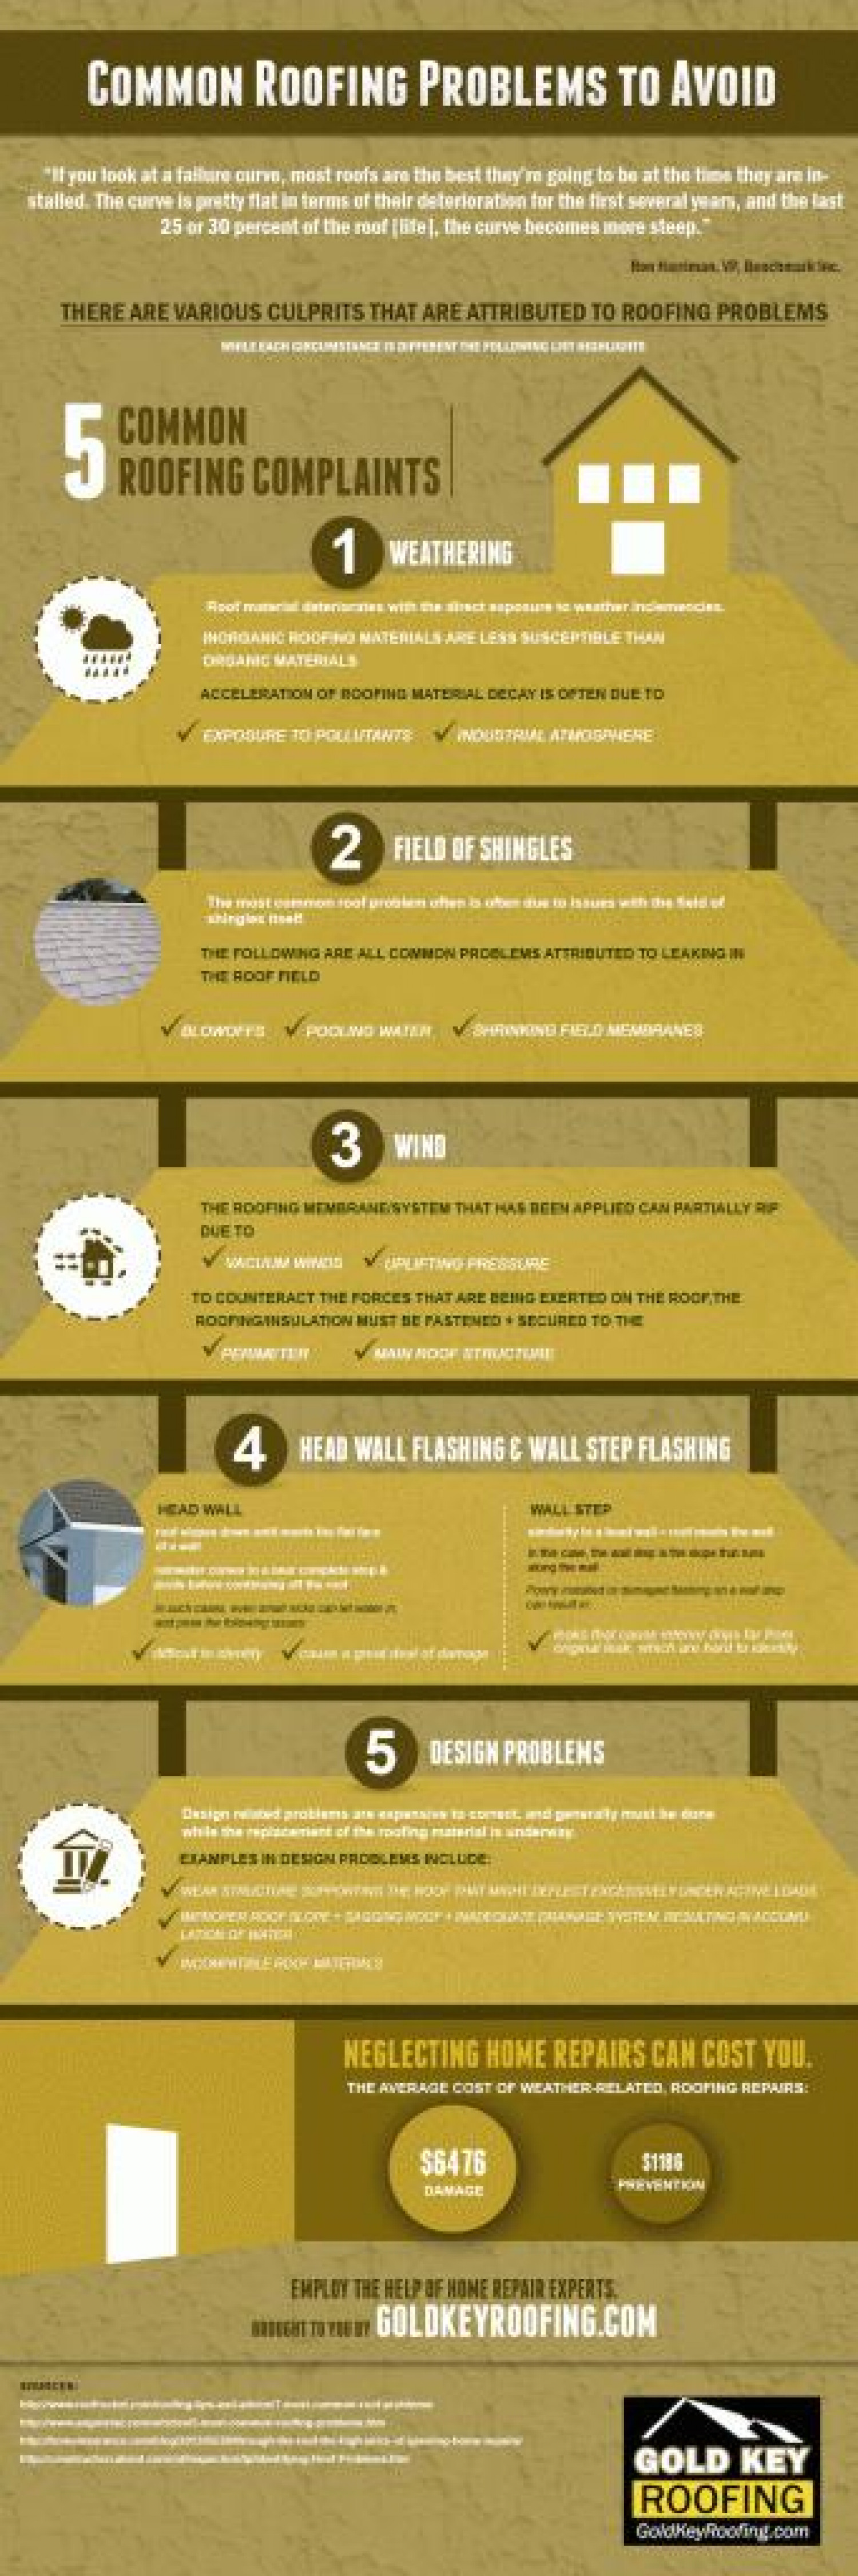 Common Roofing Problems to Avoid Infographic